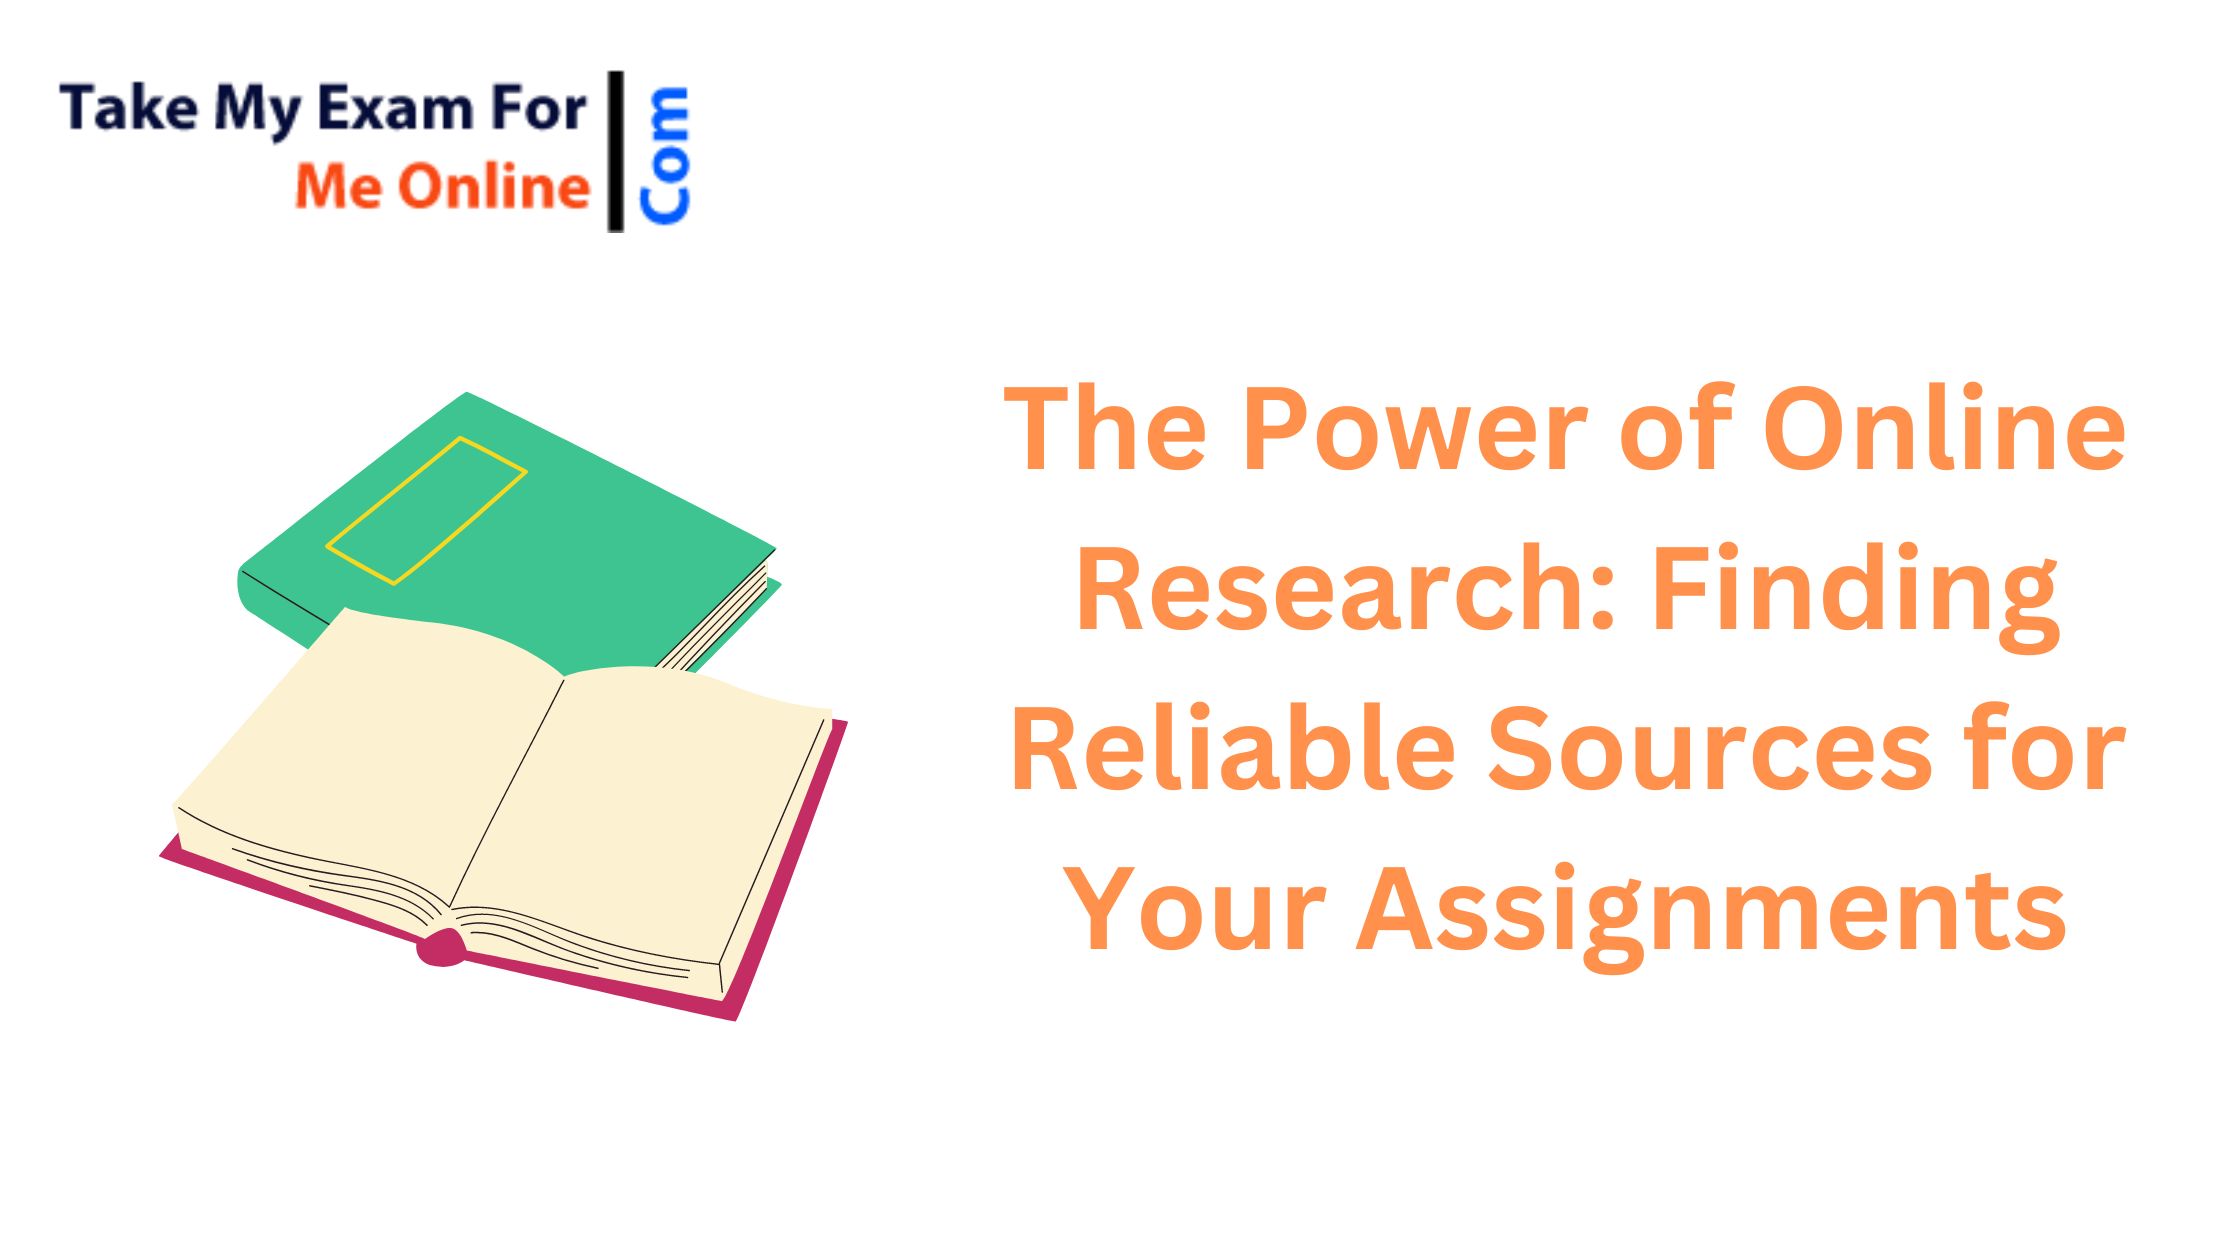 Finding Reliable Sources for Your Assignments